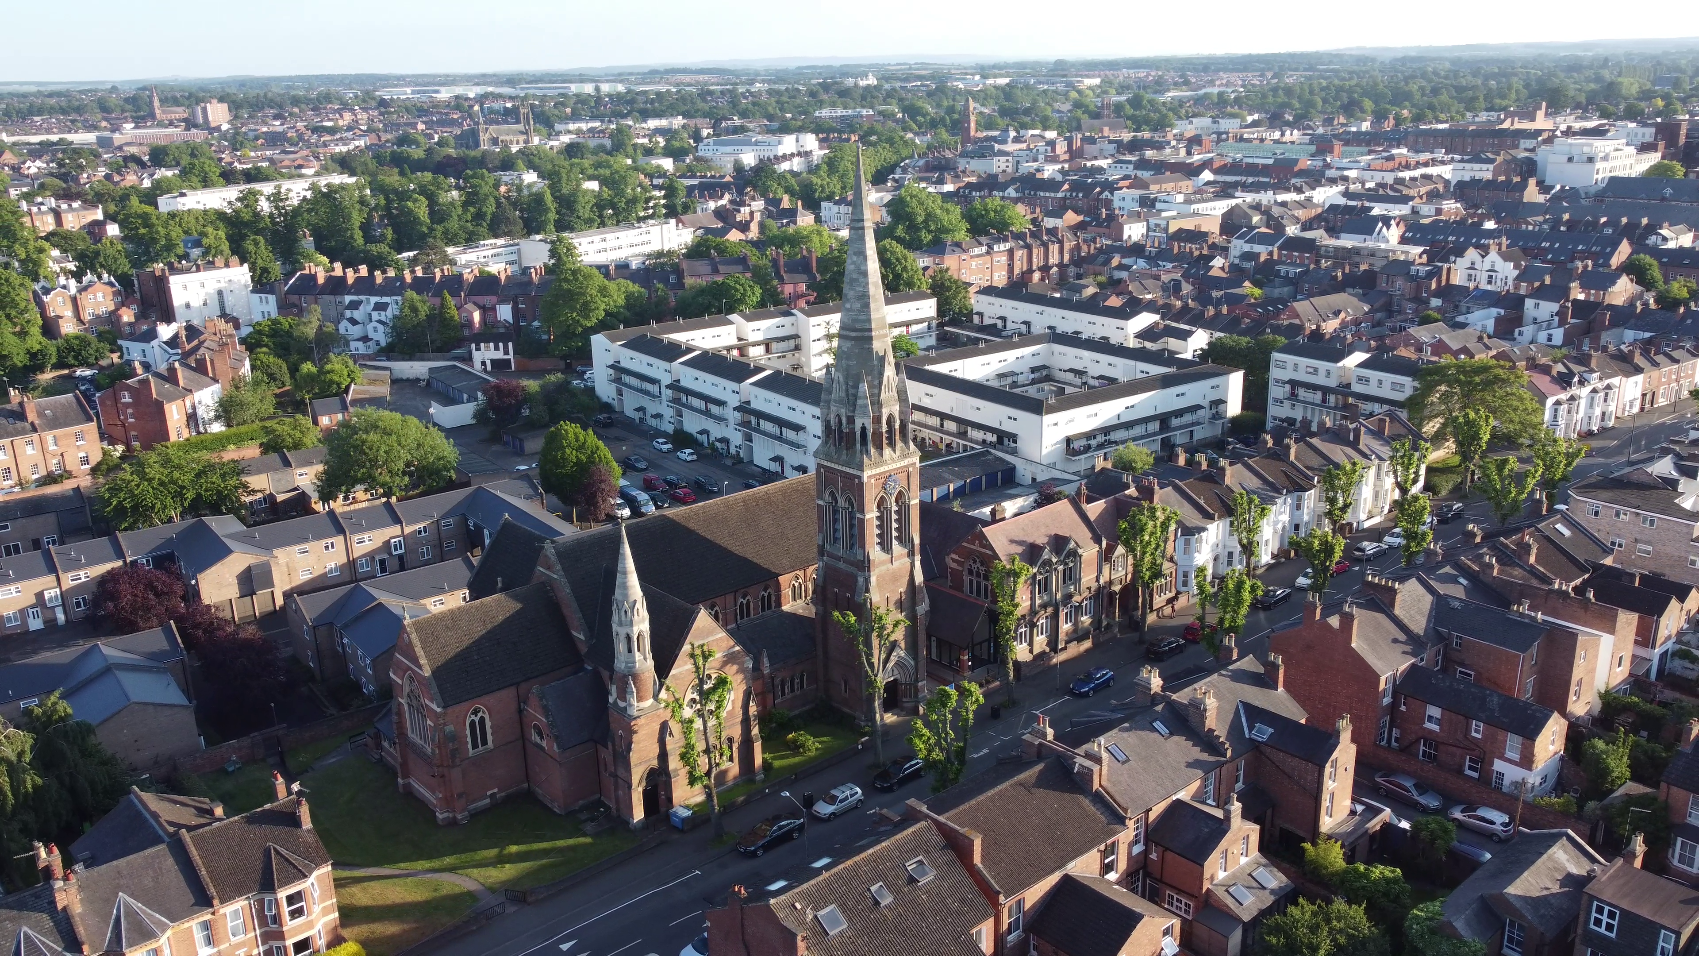 Aerial view of St Paul's Church and surrounding buildings